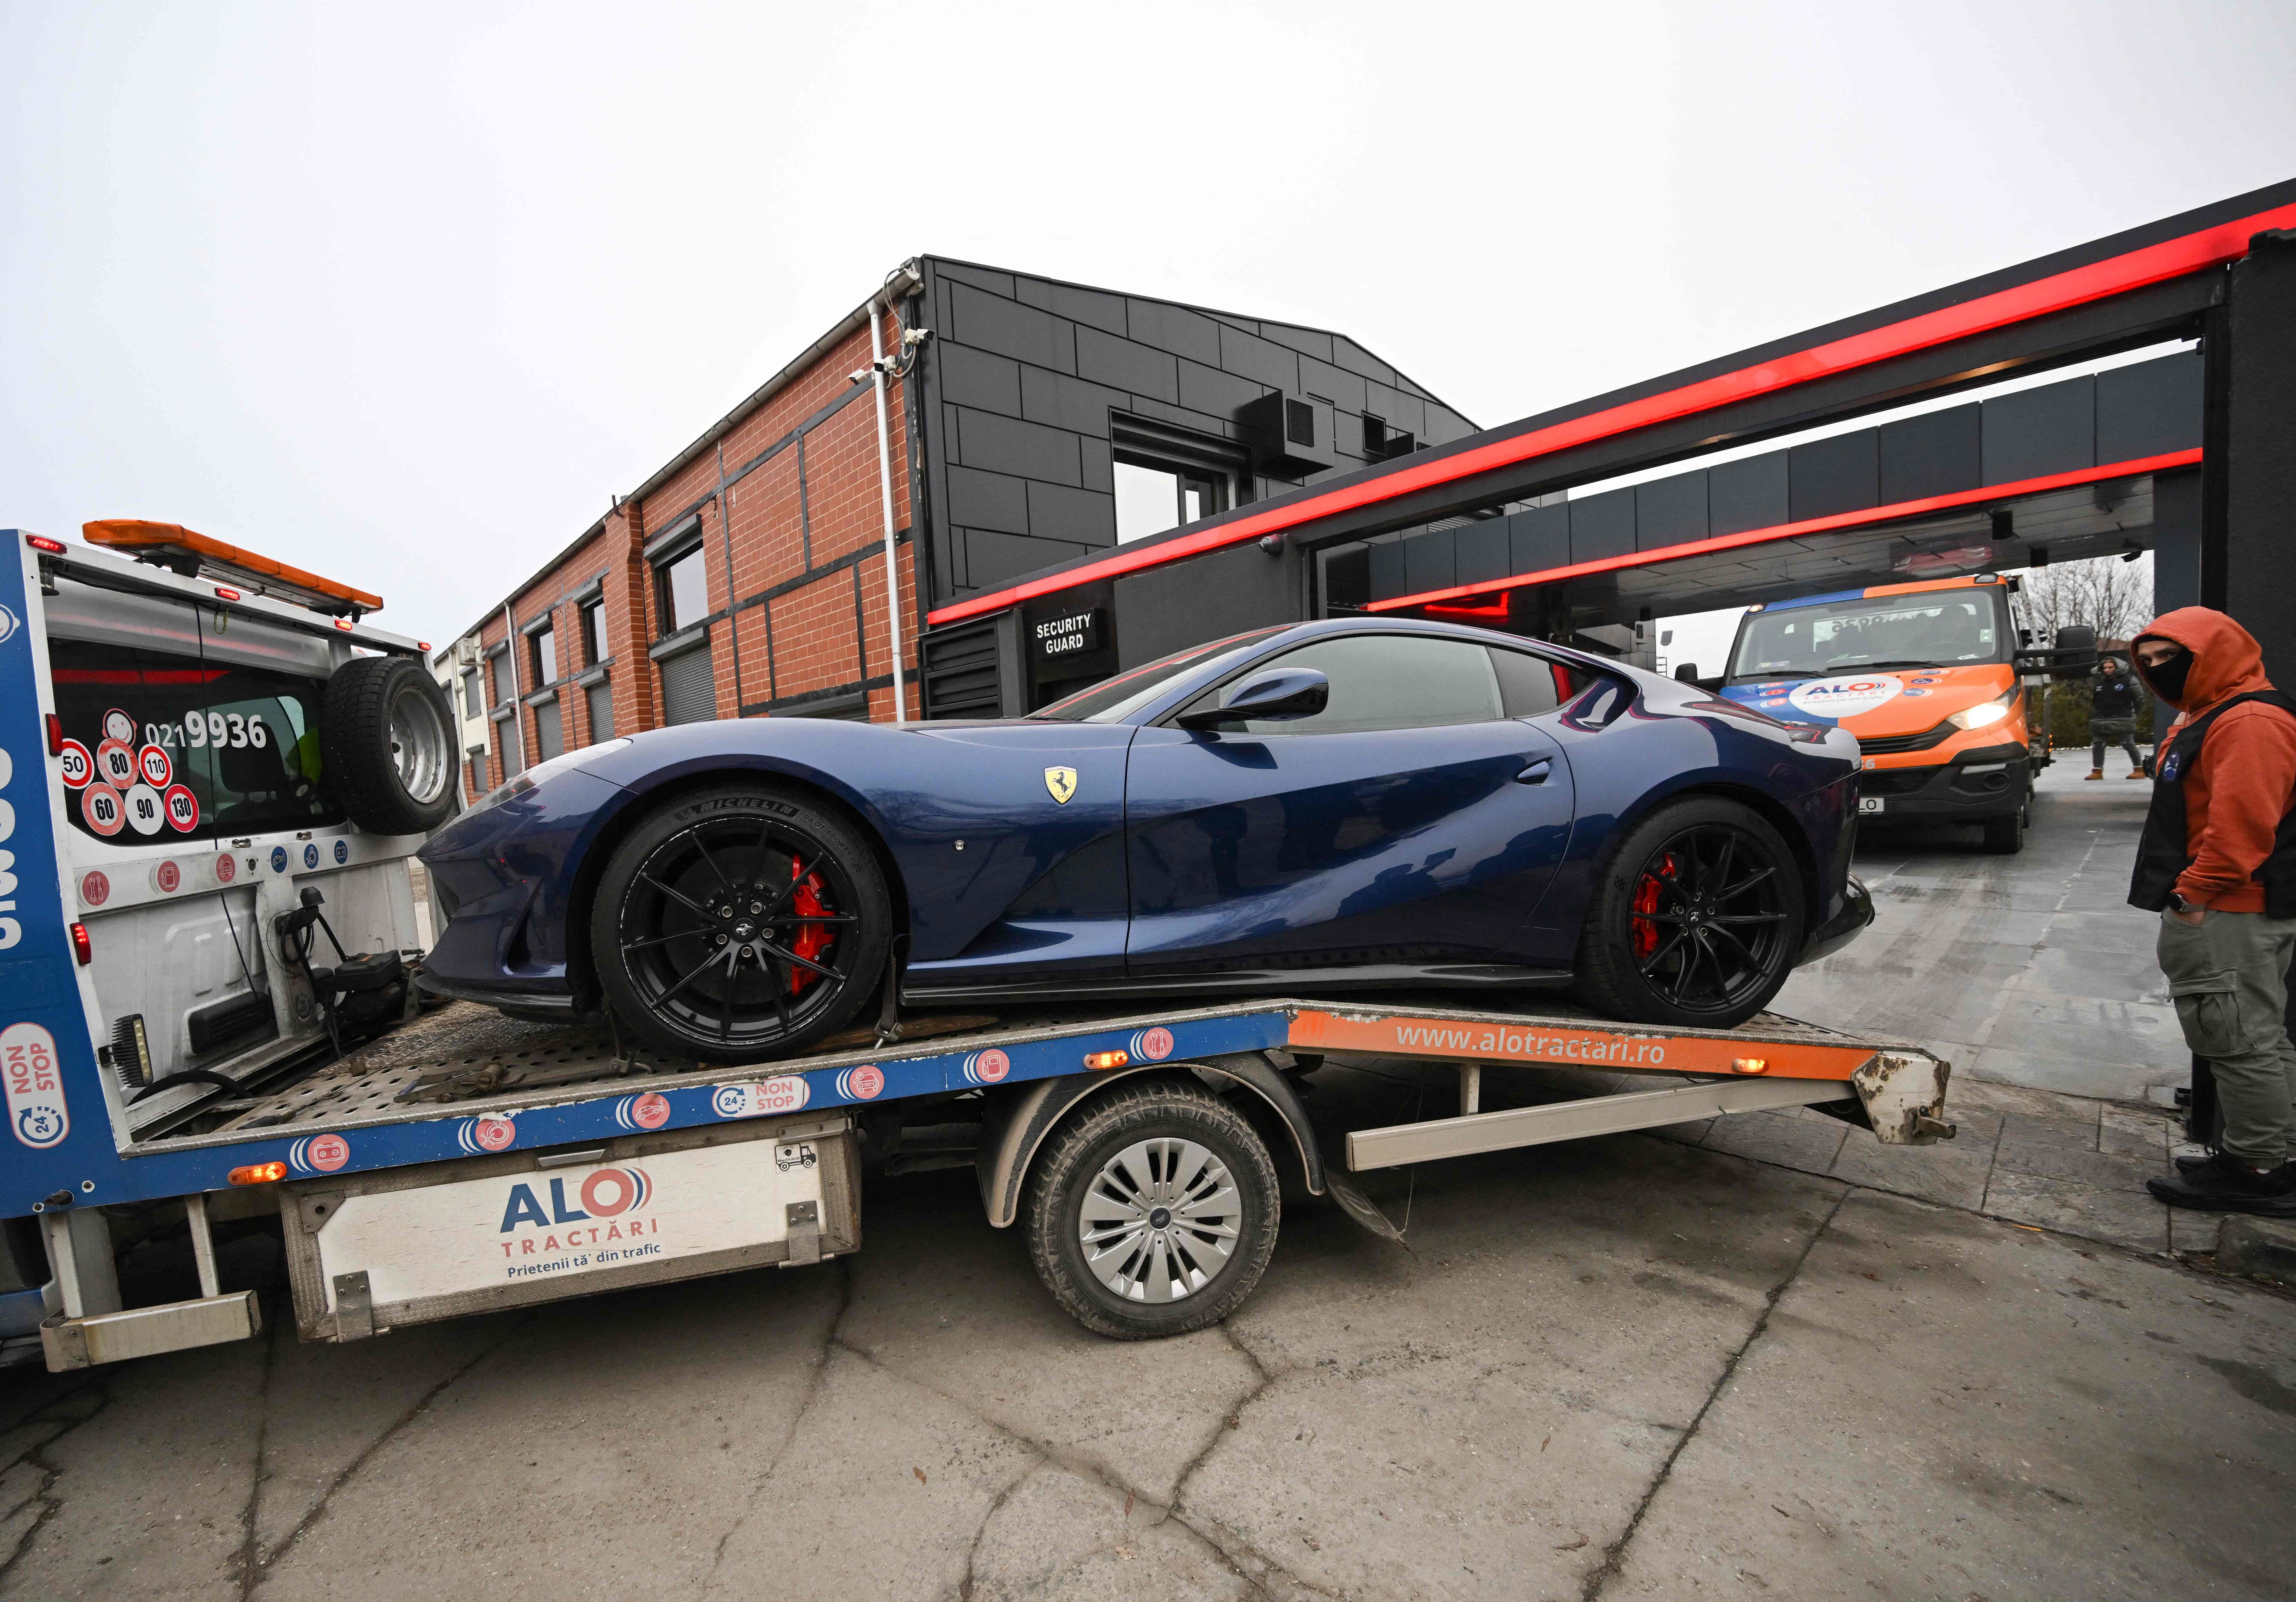 A navy blue Ferrari belonging to Andrew Tate is taken away by Romanian authorities